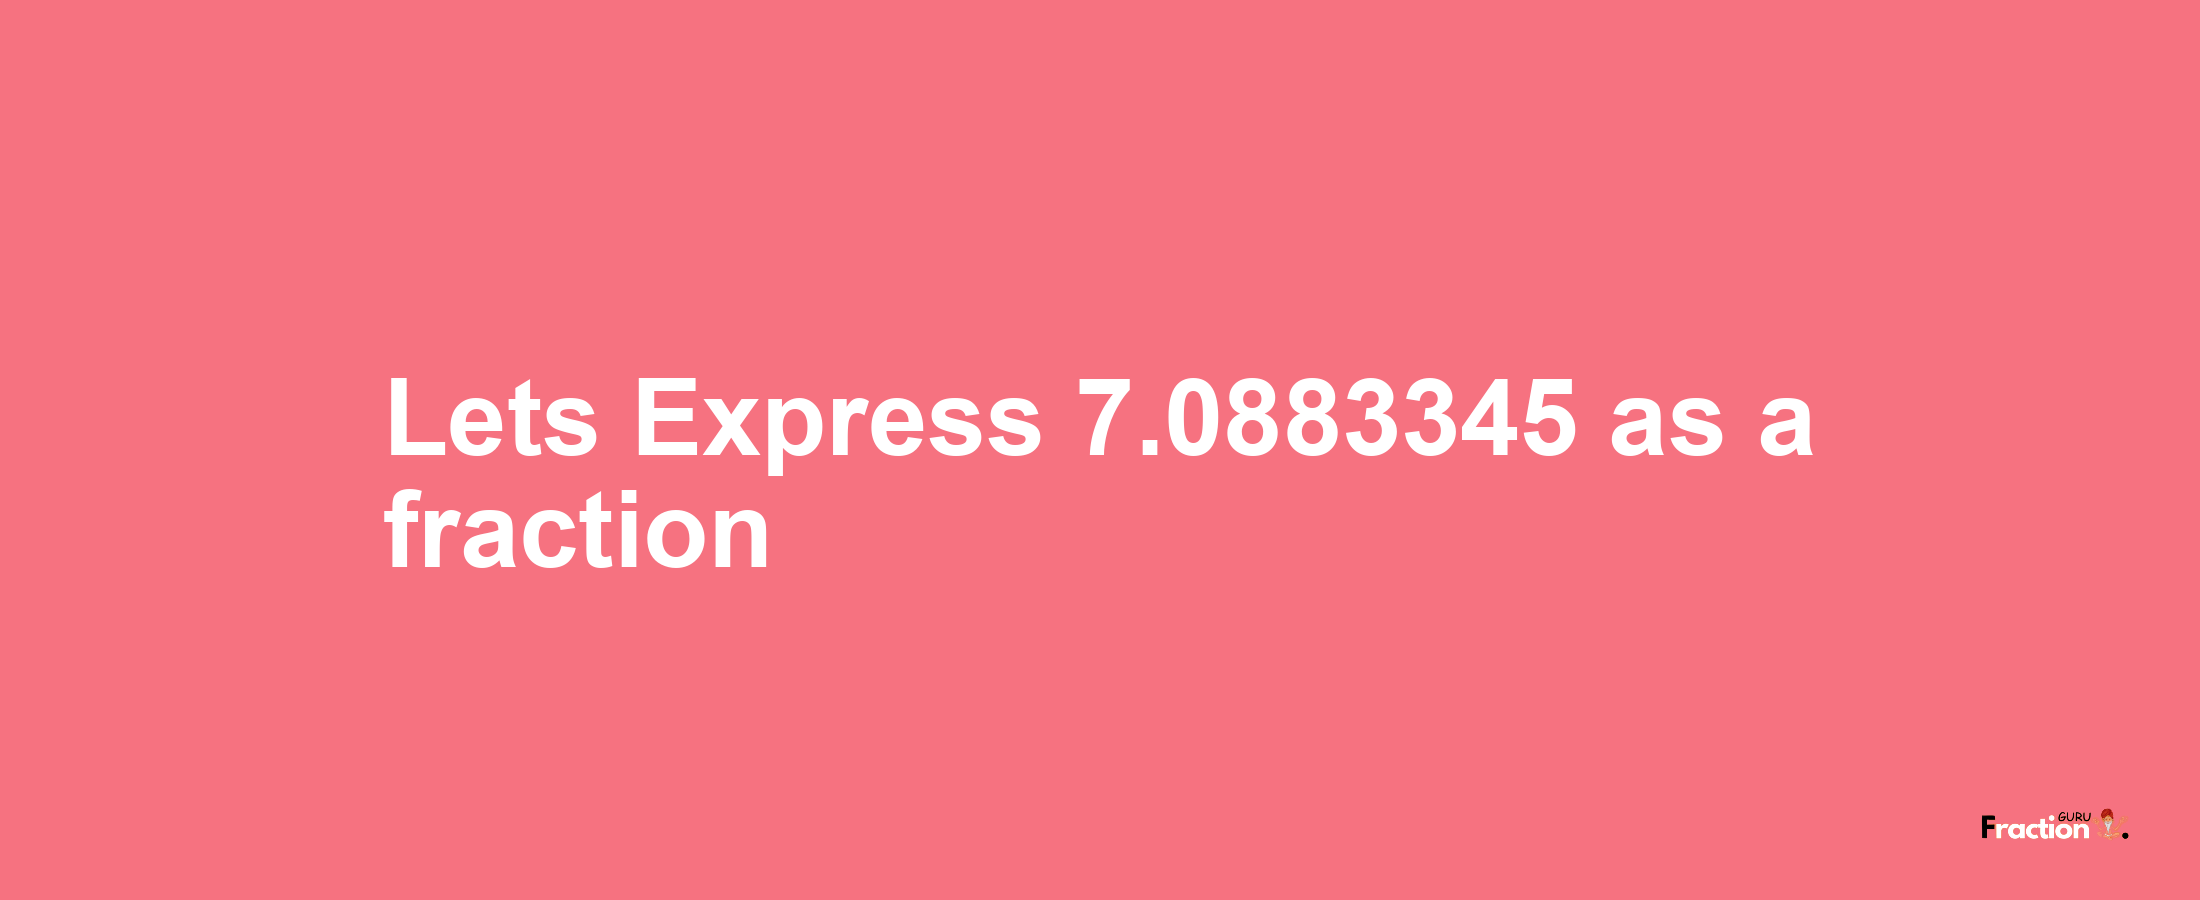 Lets Express 7.0883345 as afraction